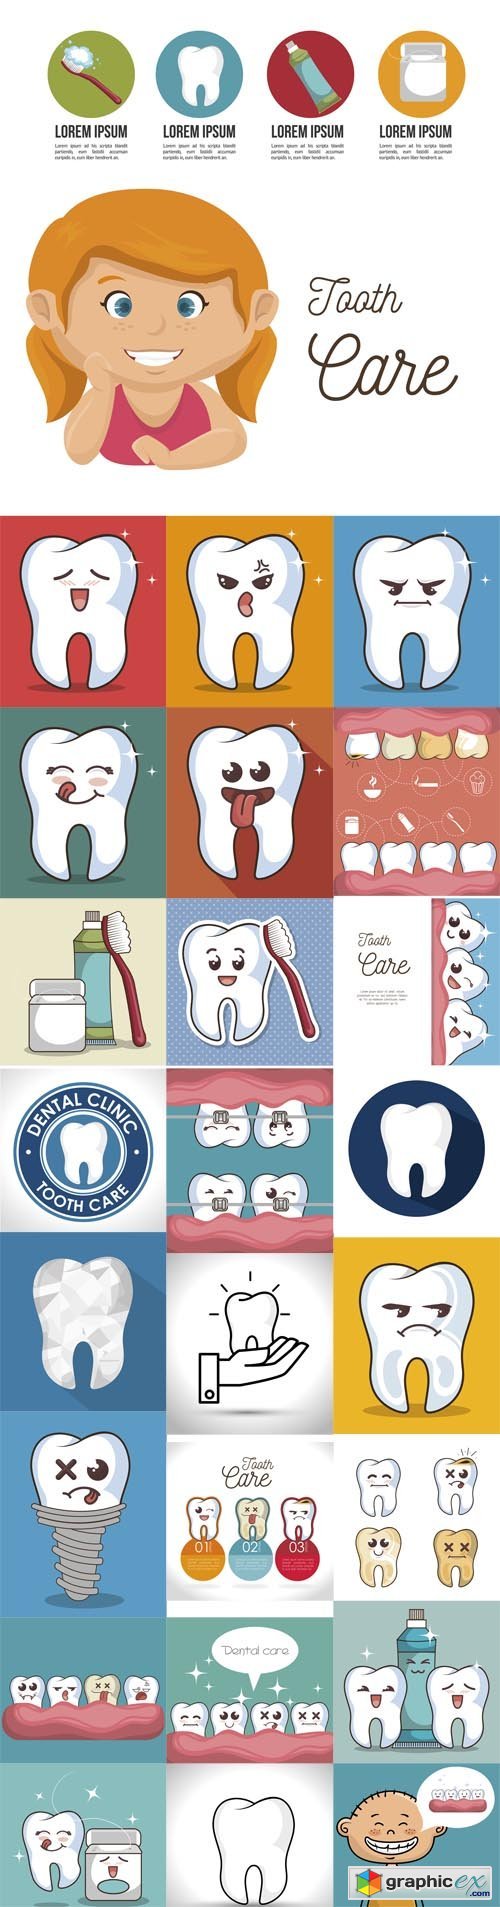 Human Tooth Character Icon Illustration Graphic